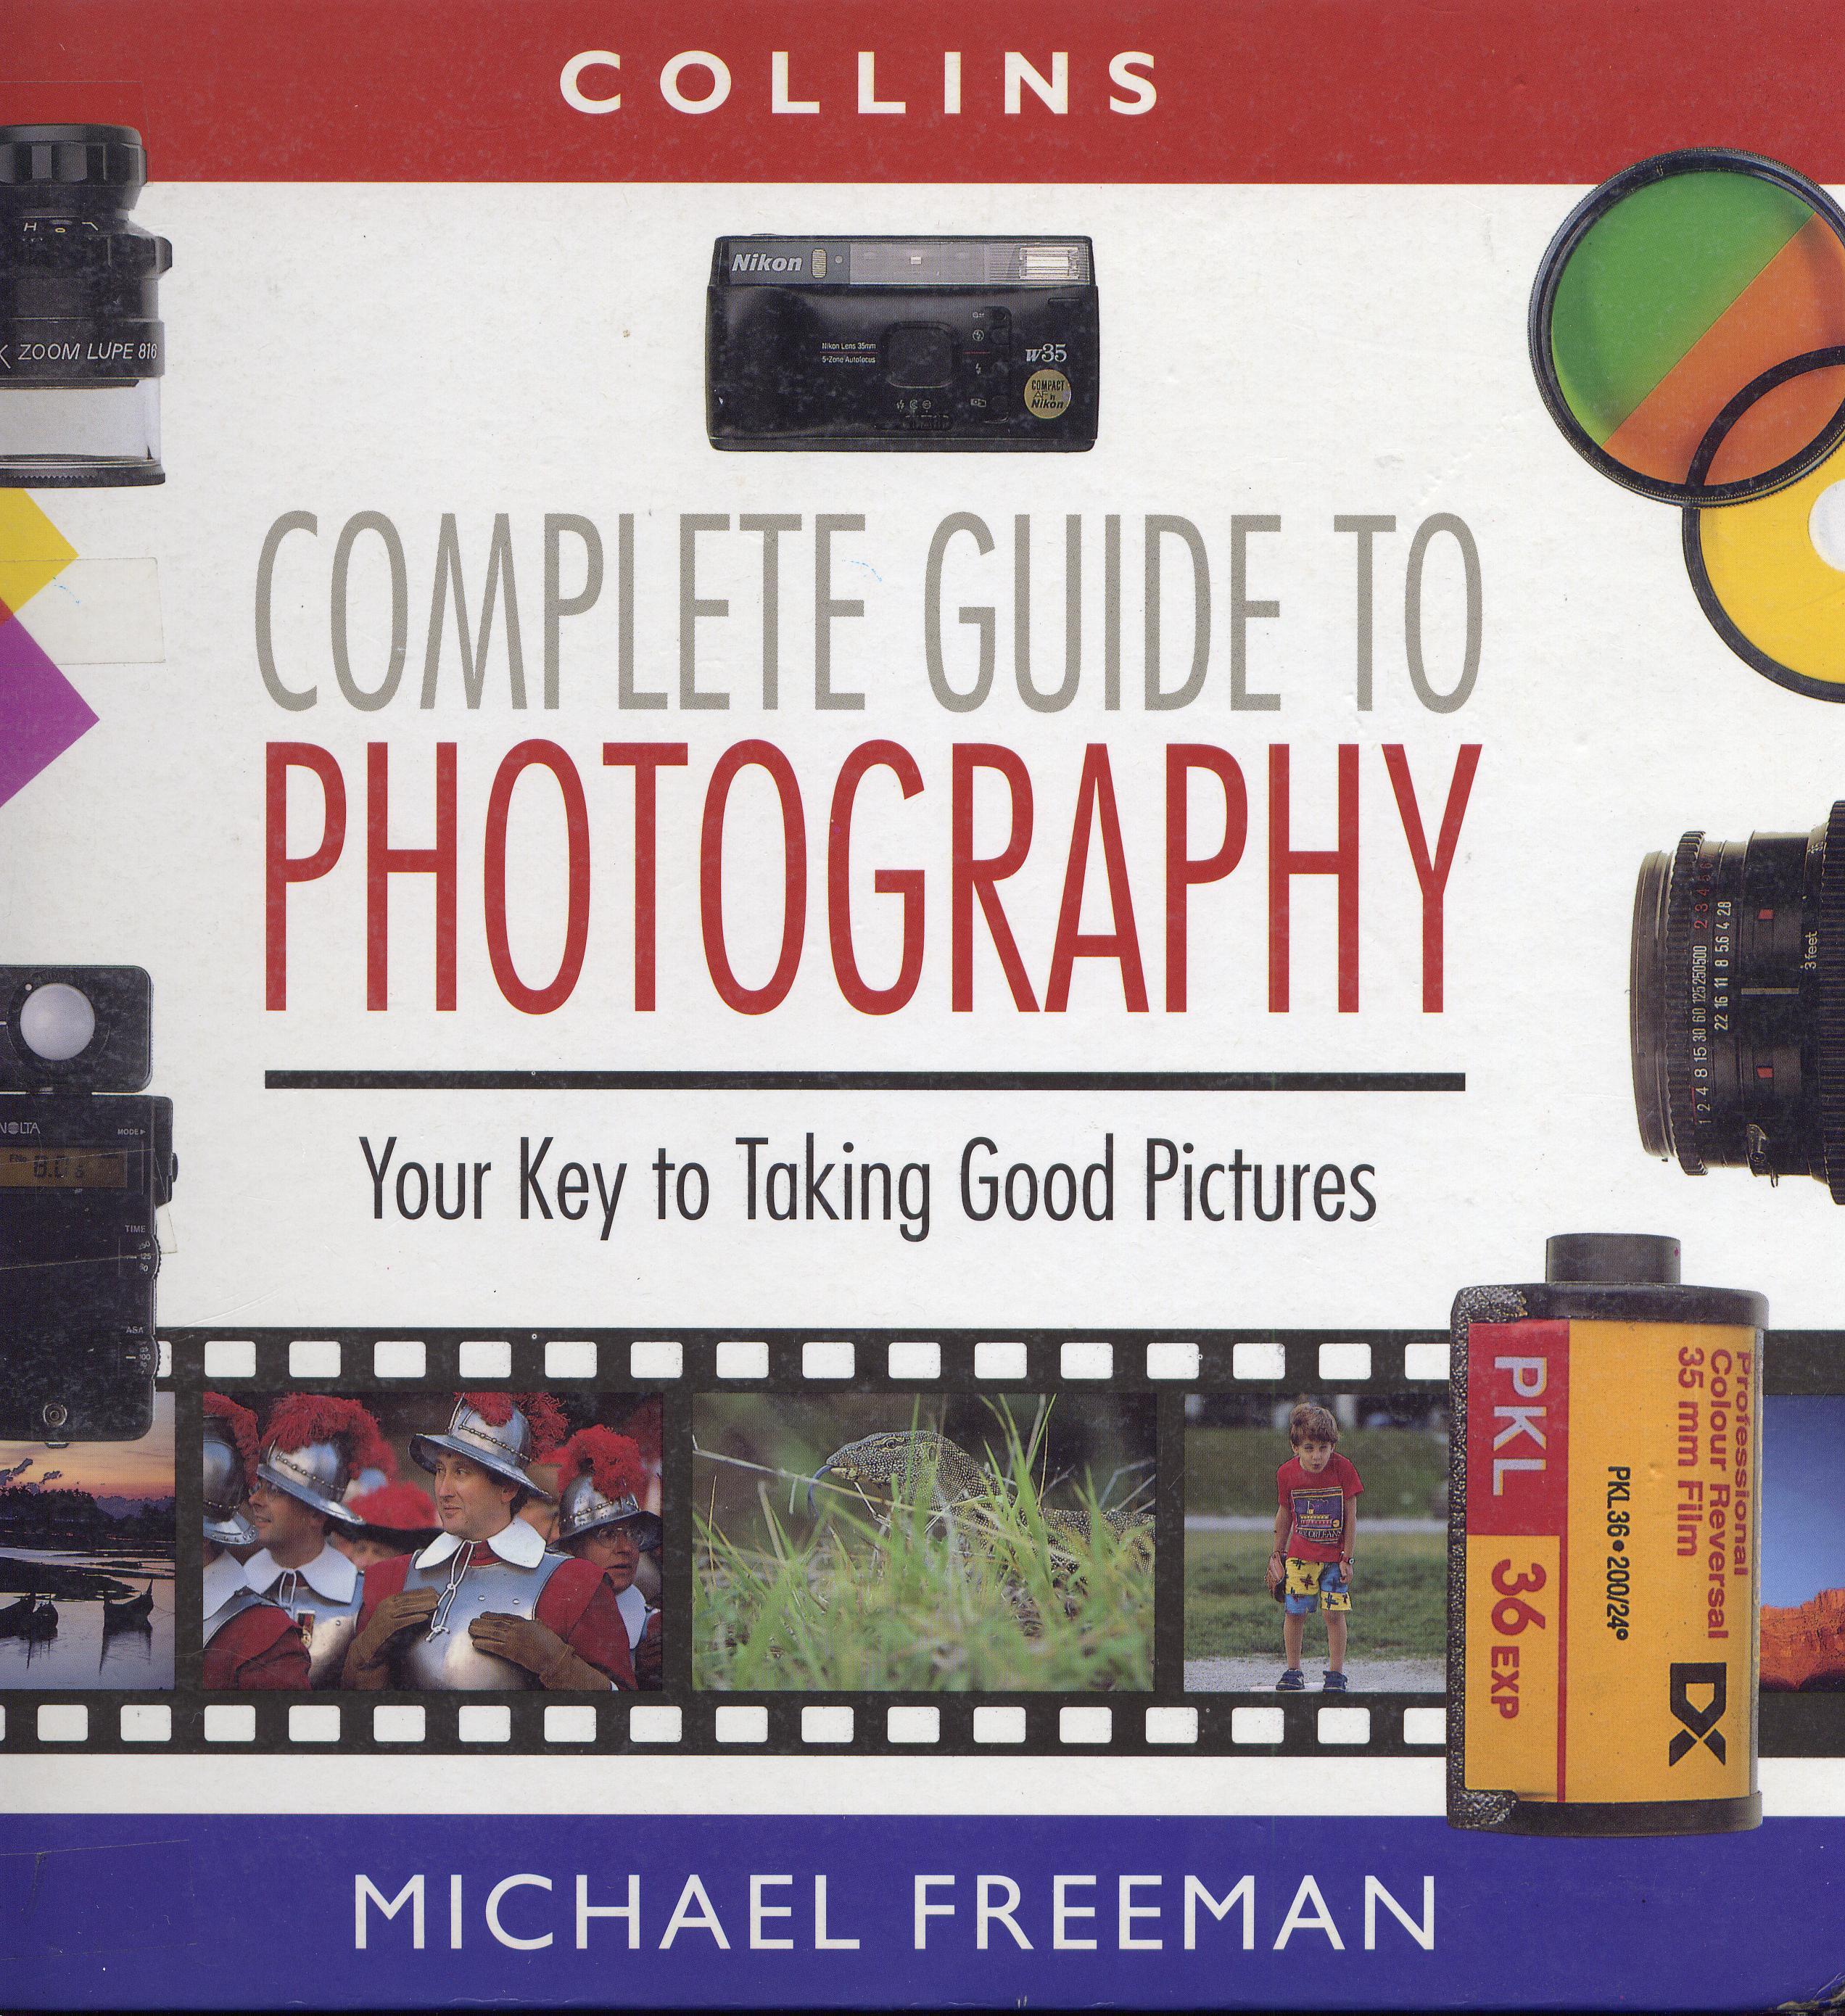 Collins Book On Complete Guide to Photography (by Michael Freeman)